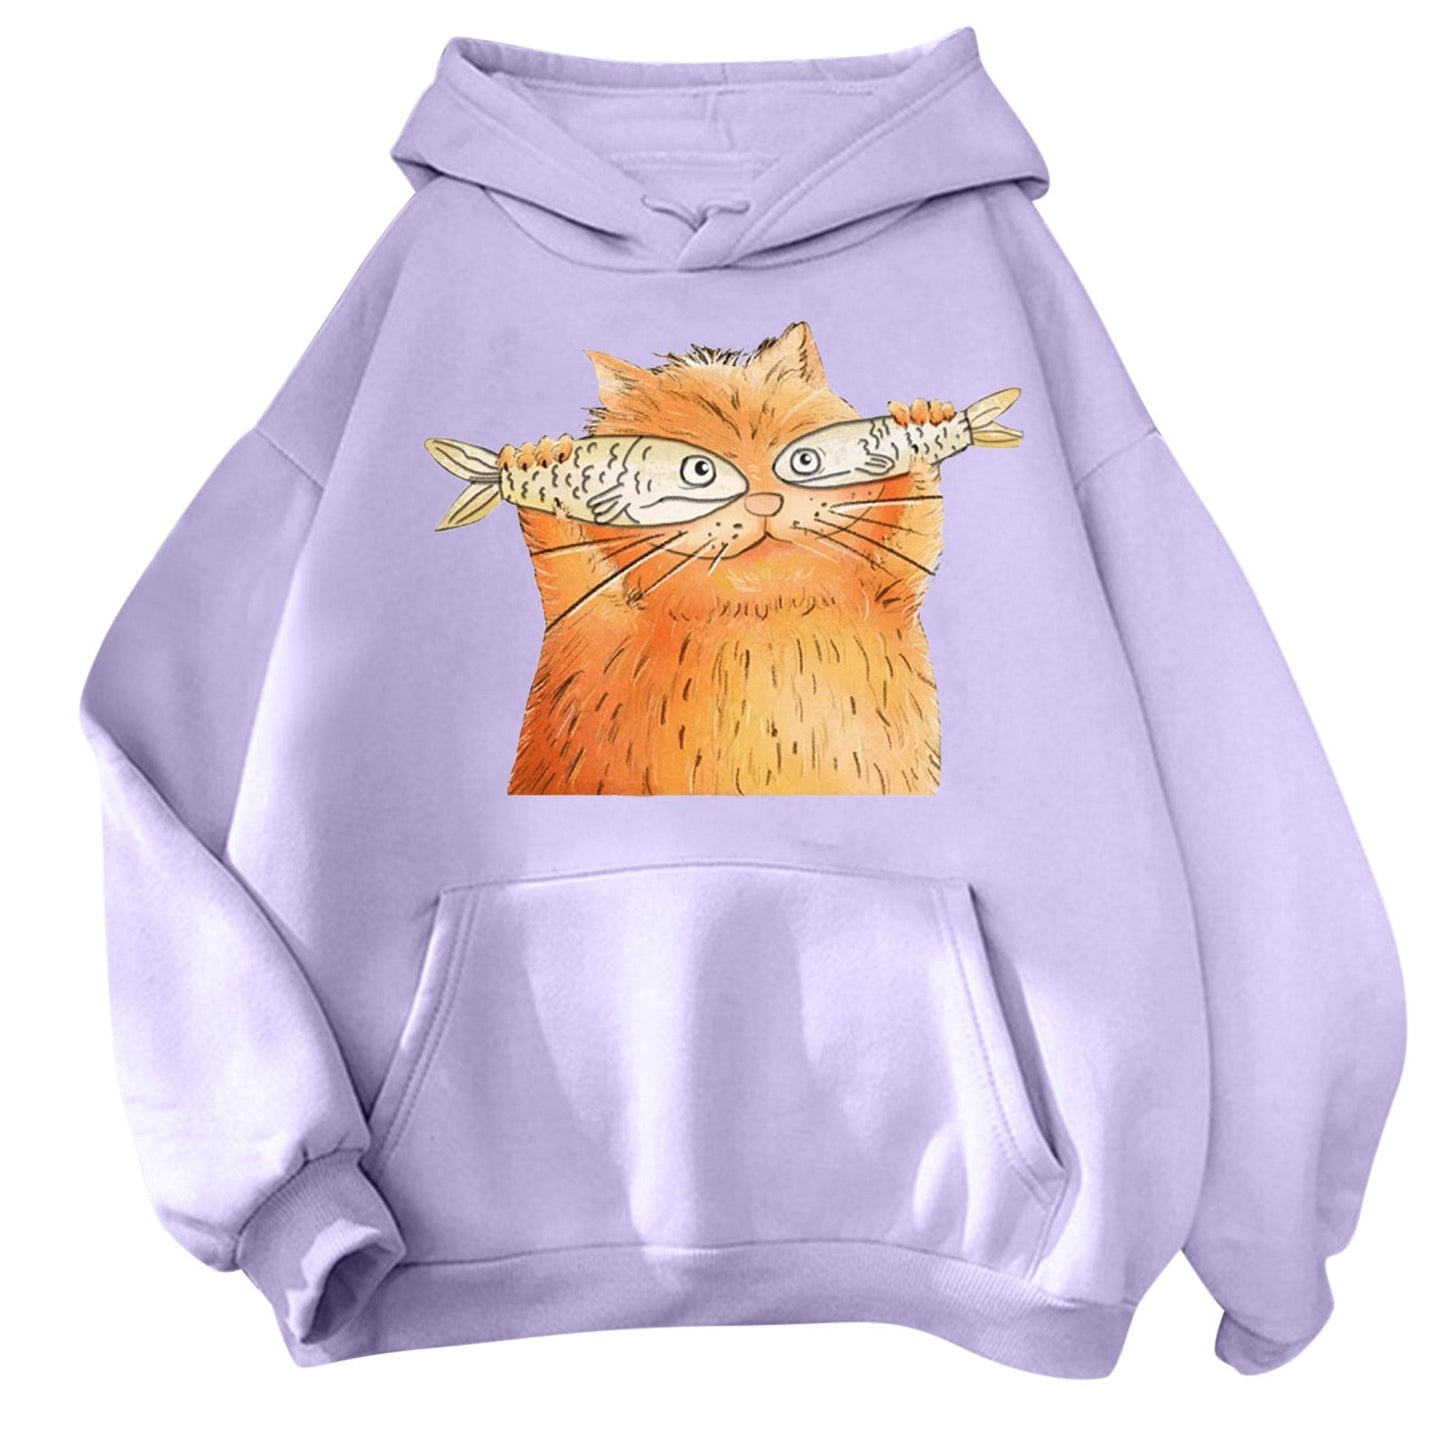 purple womens hoodie printed with an adorable cartoon cat holding two fish and looks funny and catchy